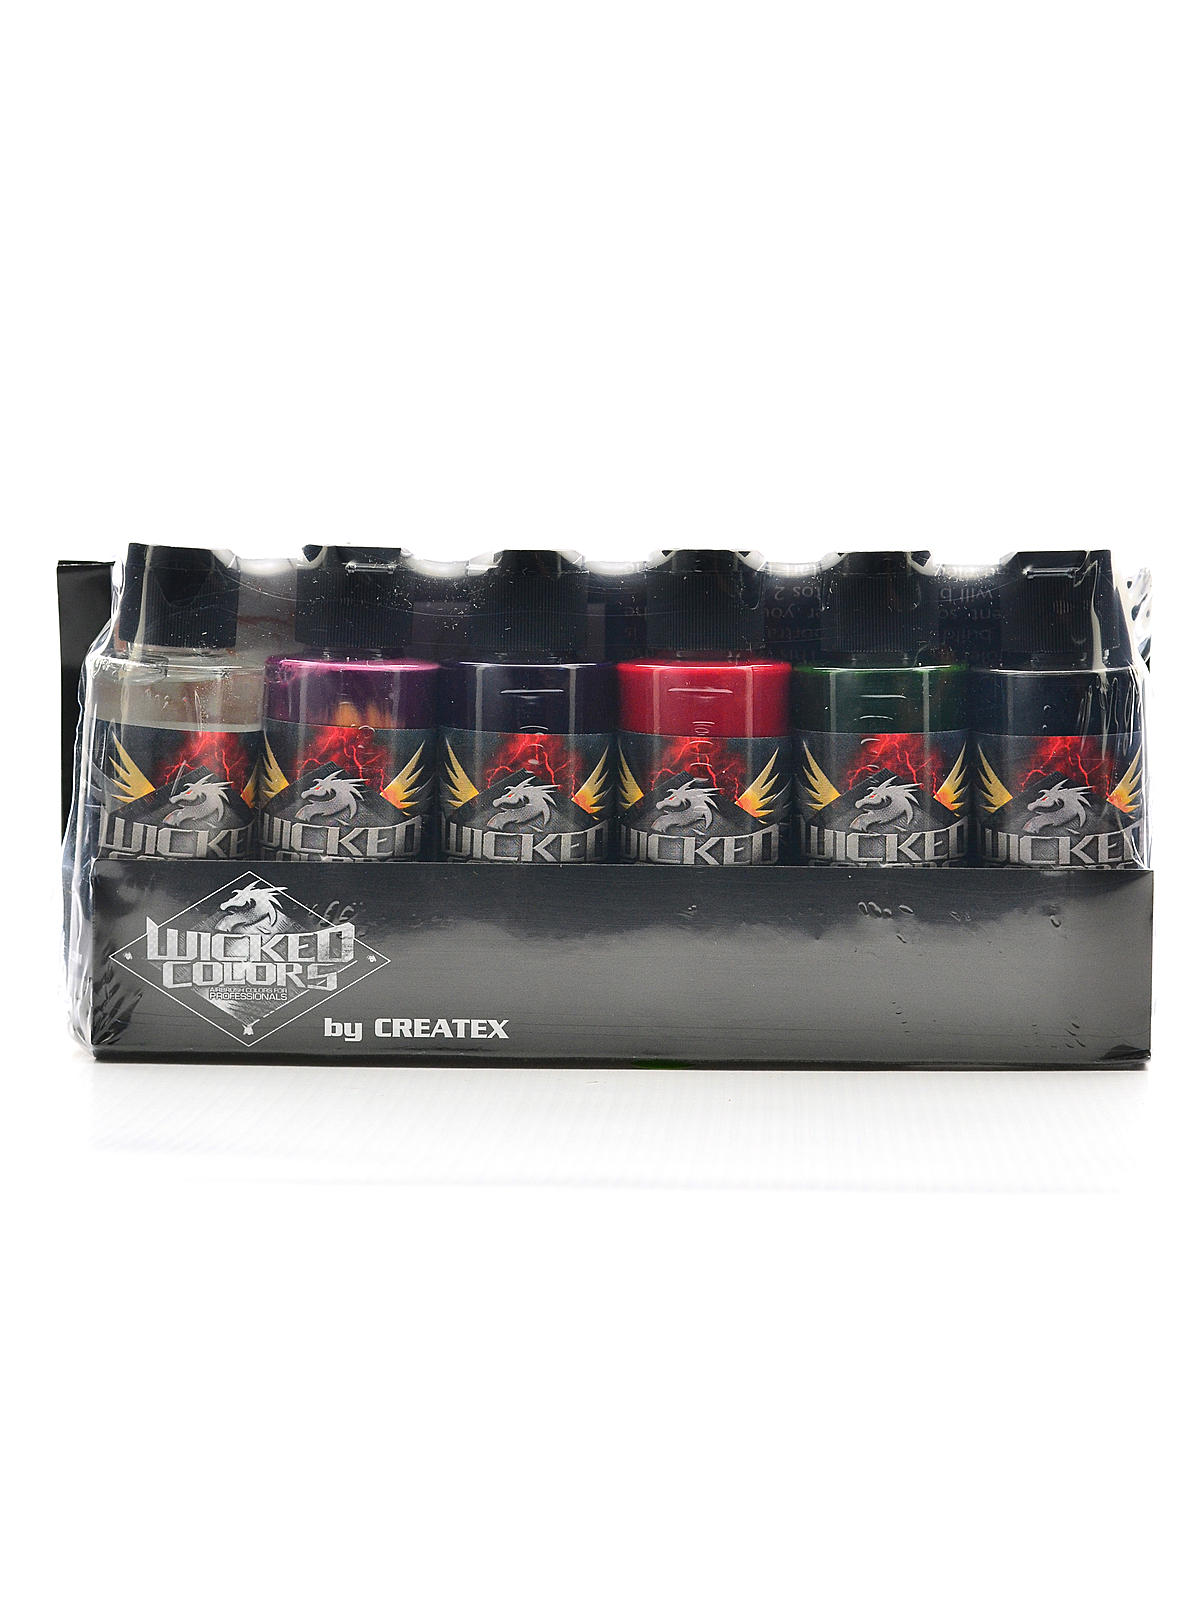 Wicked Airbrush Color Sets Steve Driscoll Flesh Tone Set 2 Oz. Set Of 6